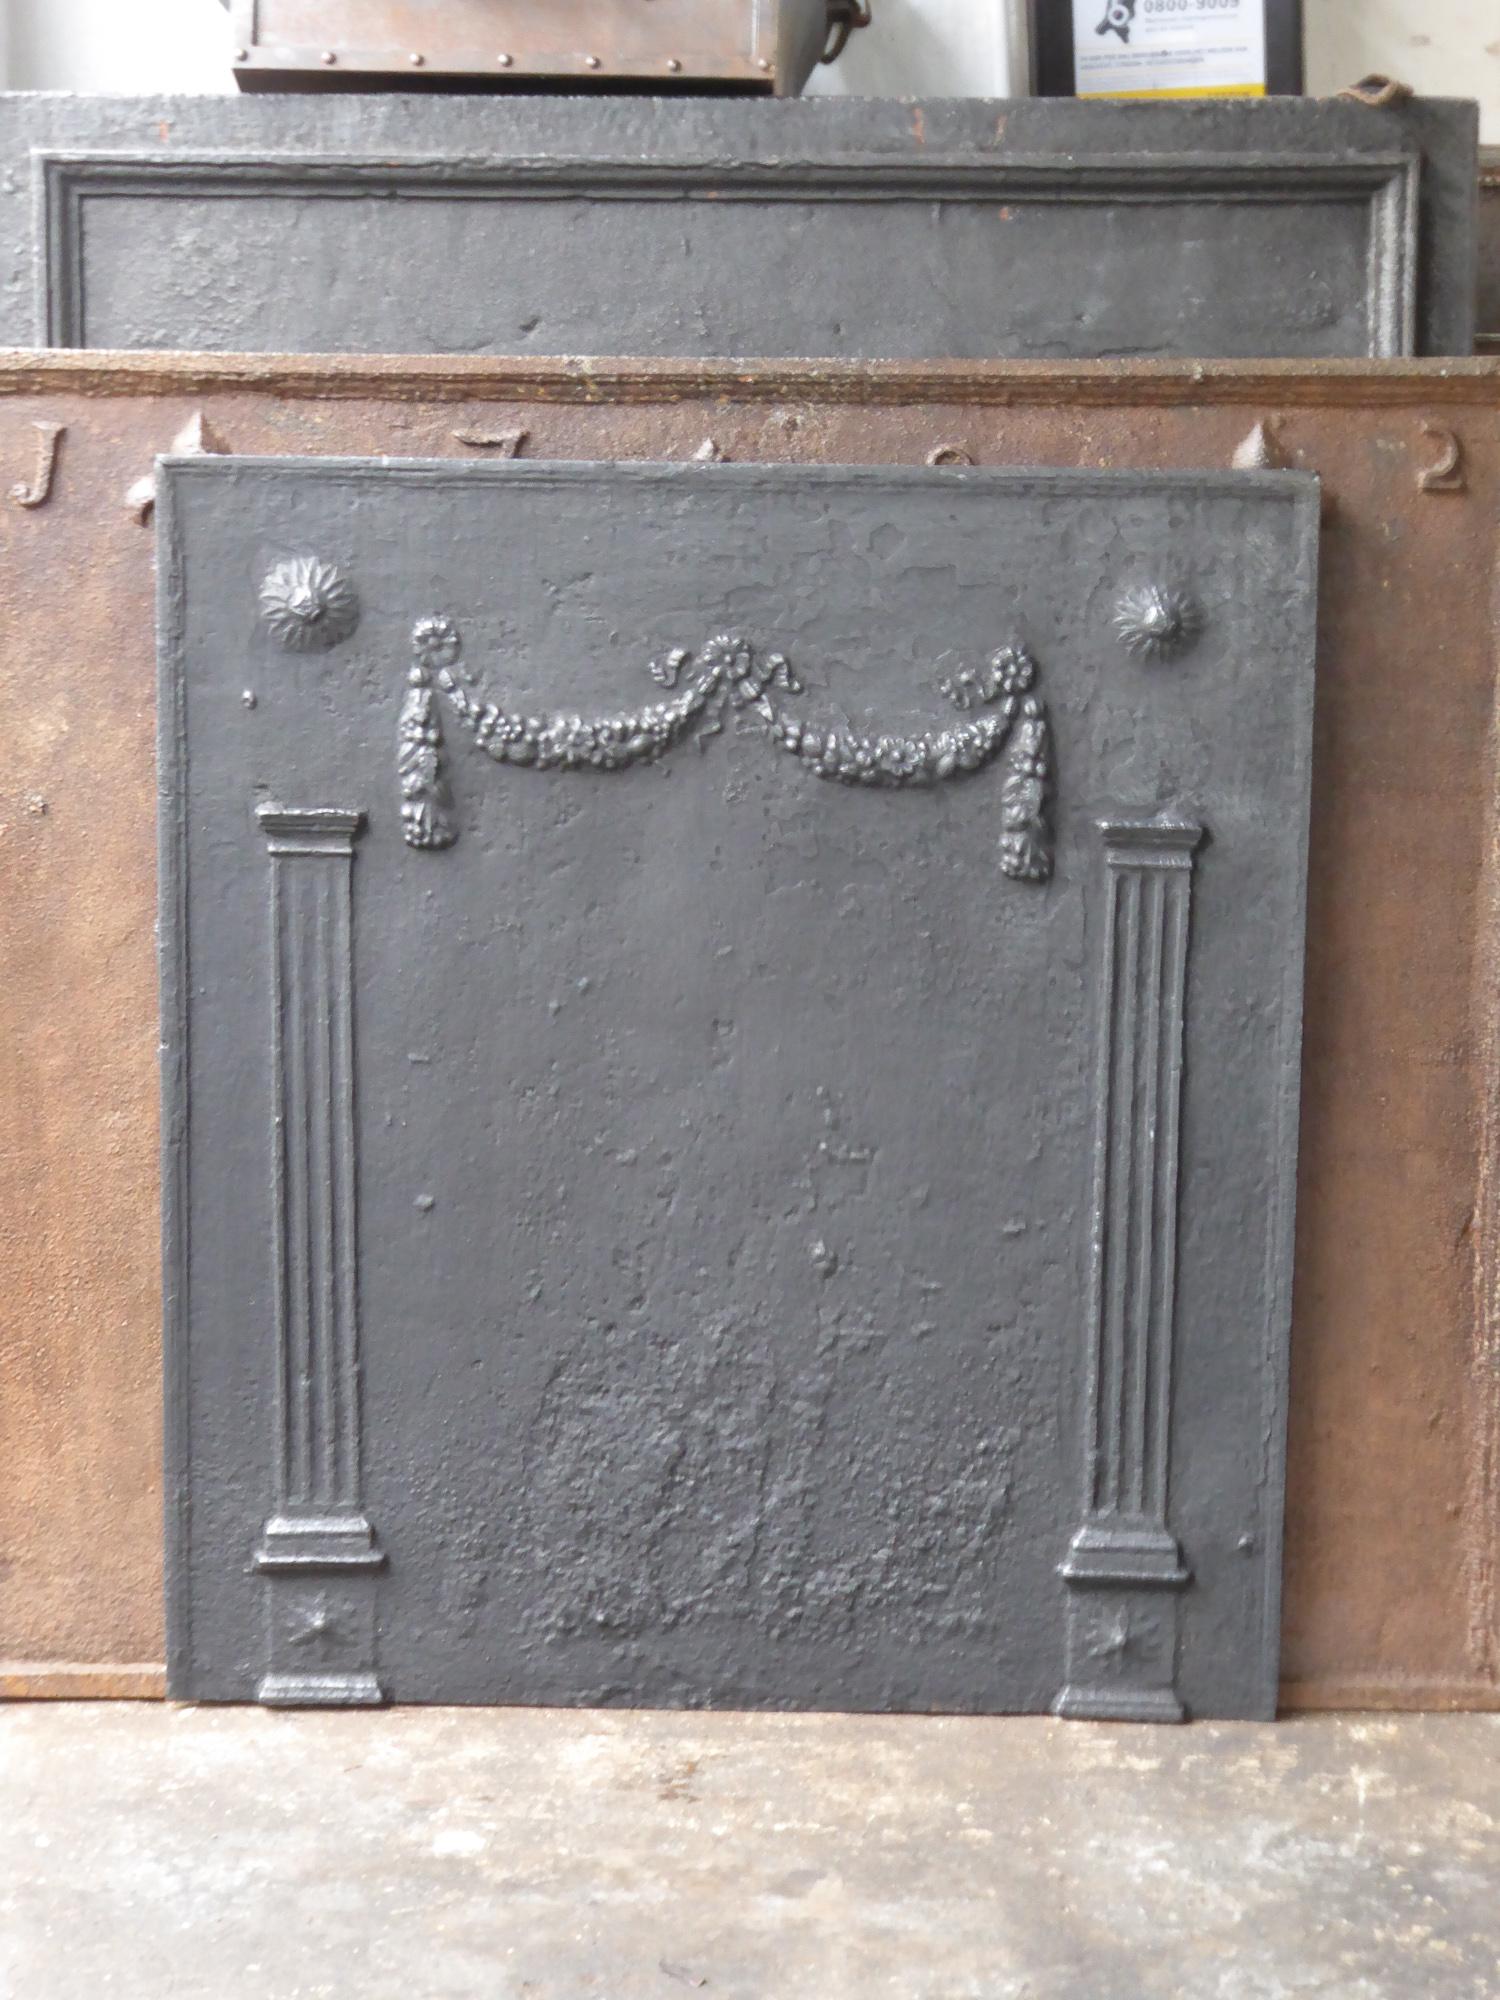 19th century French neoclassical fireback with two pillars of freedom. The pillars symbolize the value liberty, one of the three values of the French revolution. The fireback is made of cast iron and has a black